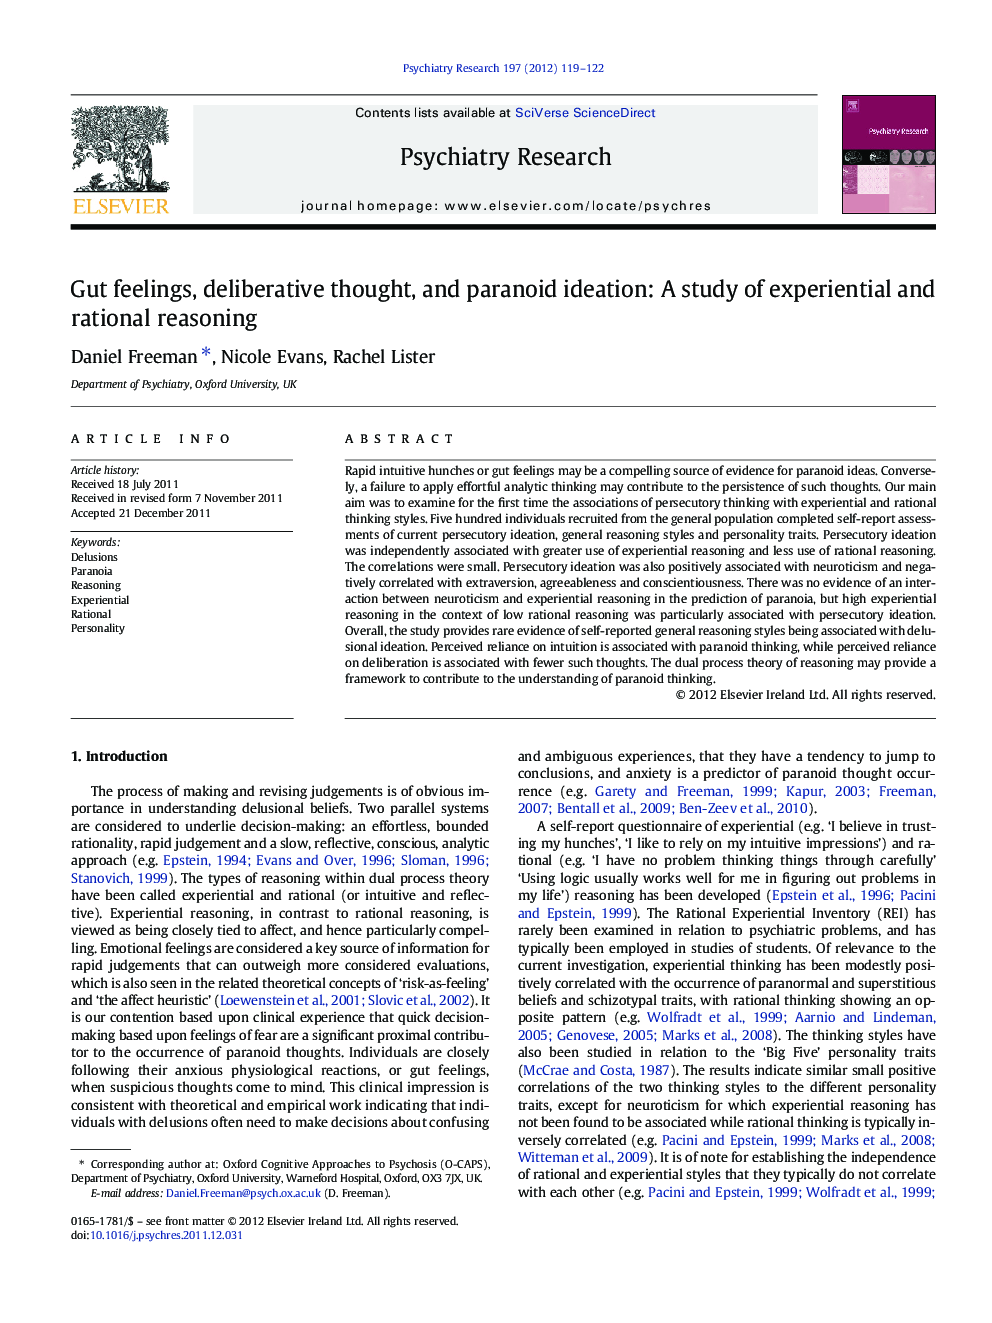 Gut feelings, deliberative thought, and paranoid ideation: A study of experiential and rational reasoning